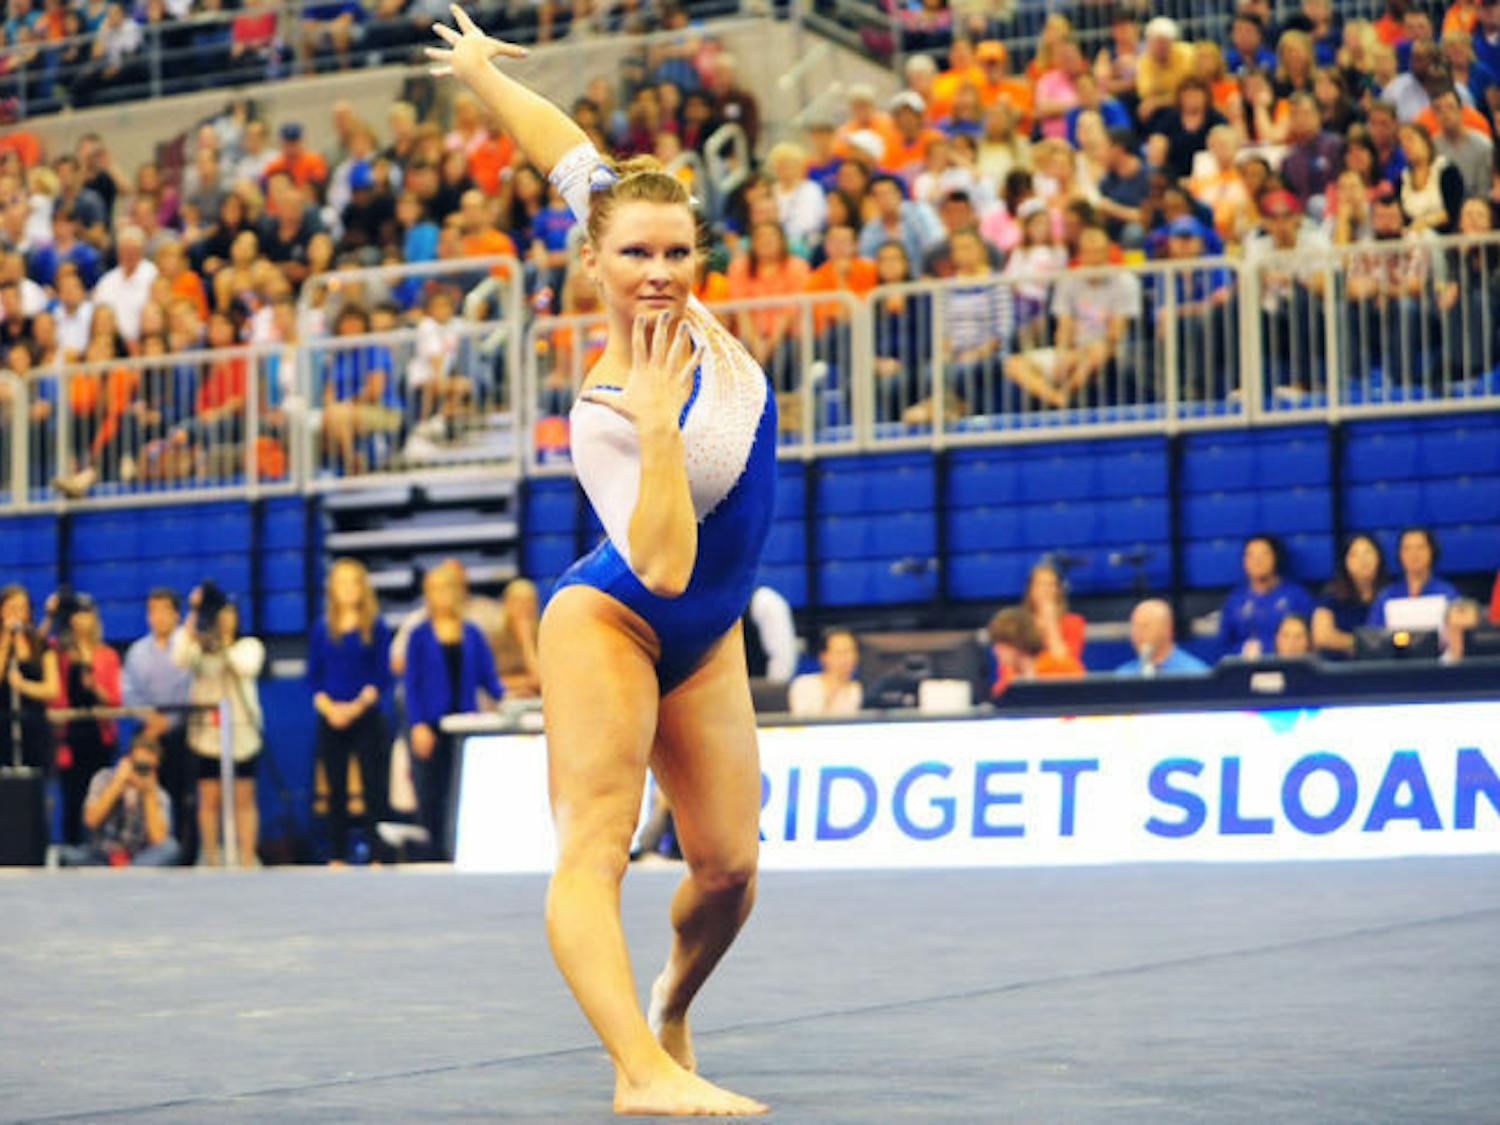 Bridget Sloan performs her floor routine during Florida’s 198.1-196.85 win against Alabama on Feb. 8 in the O’Connell Center. Sloan won uneven bars (9.95) and all-around (39.675) against the Crimson Tide.